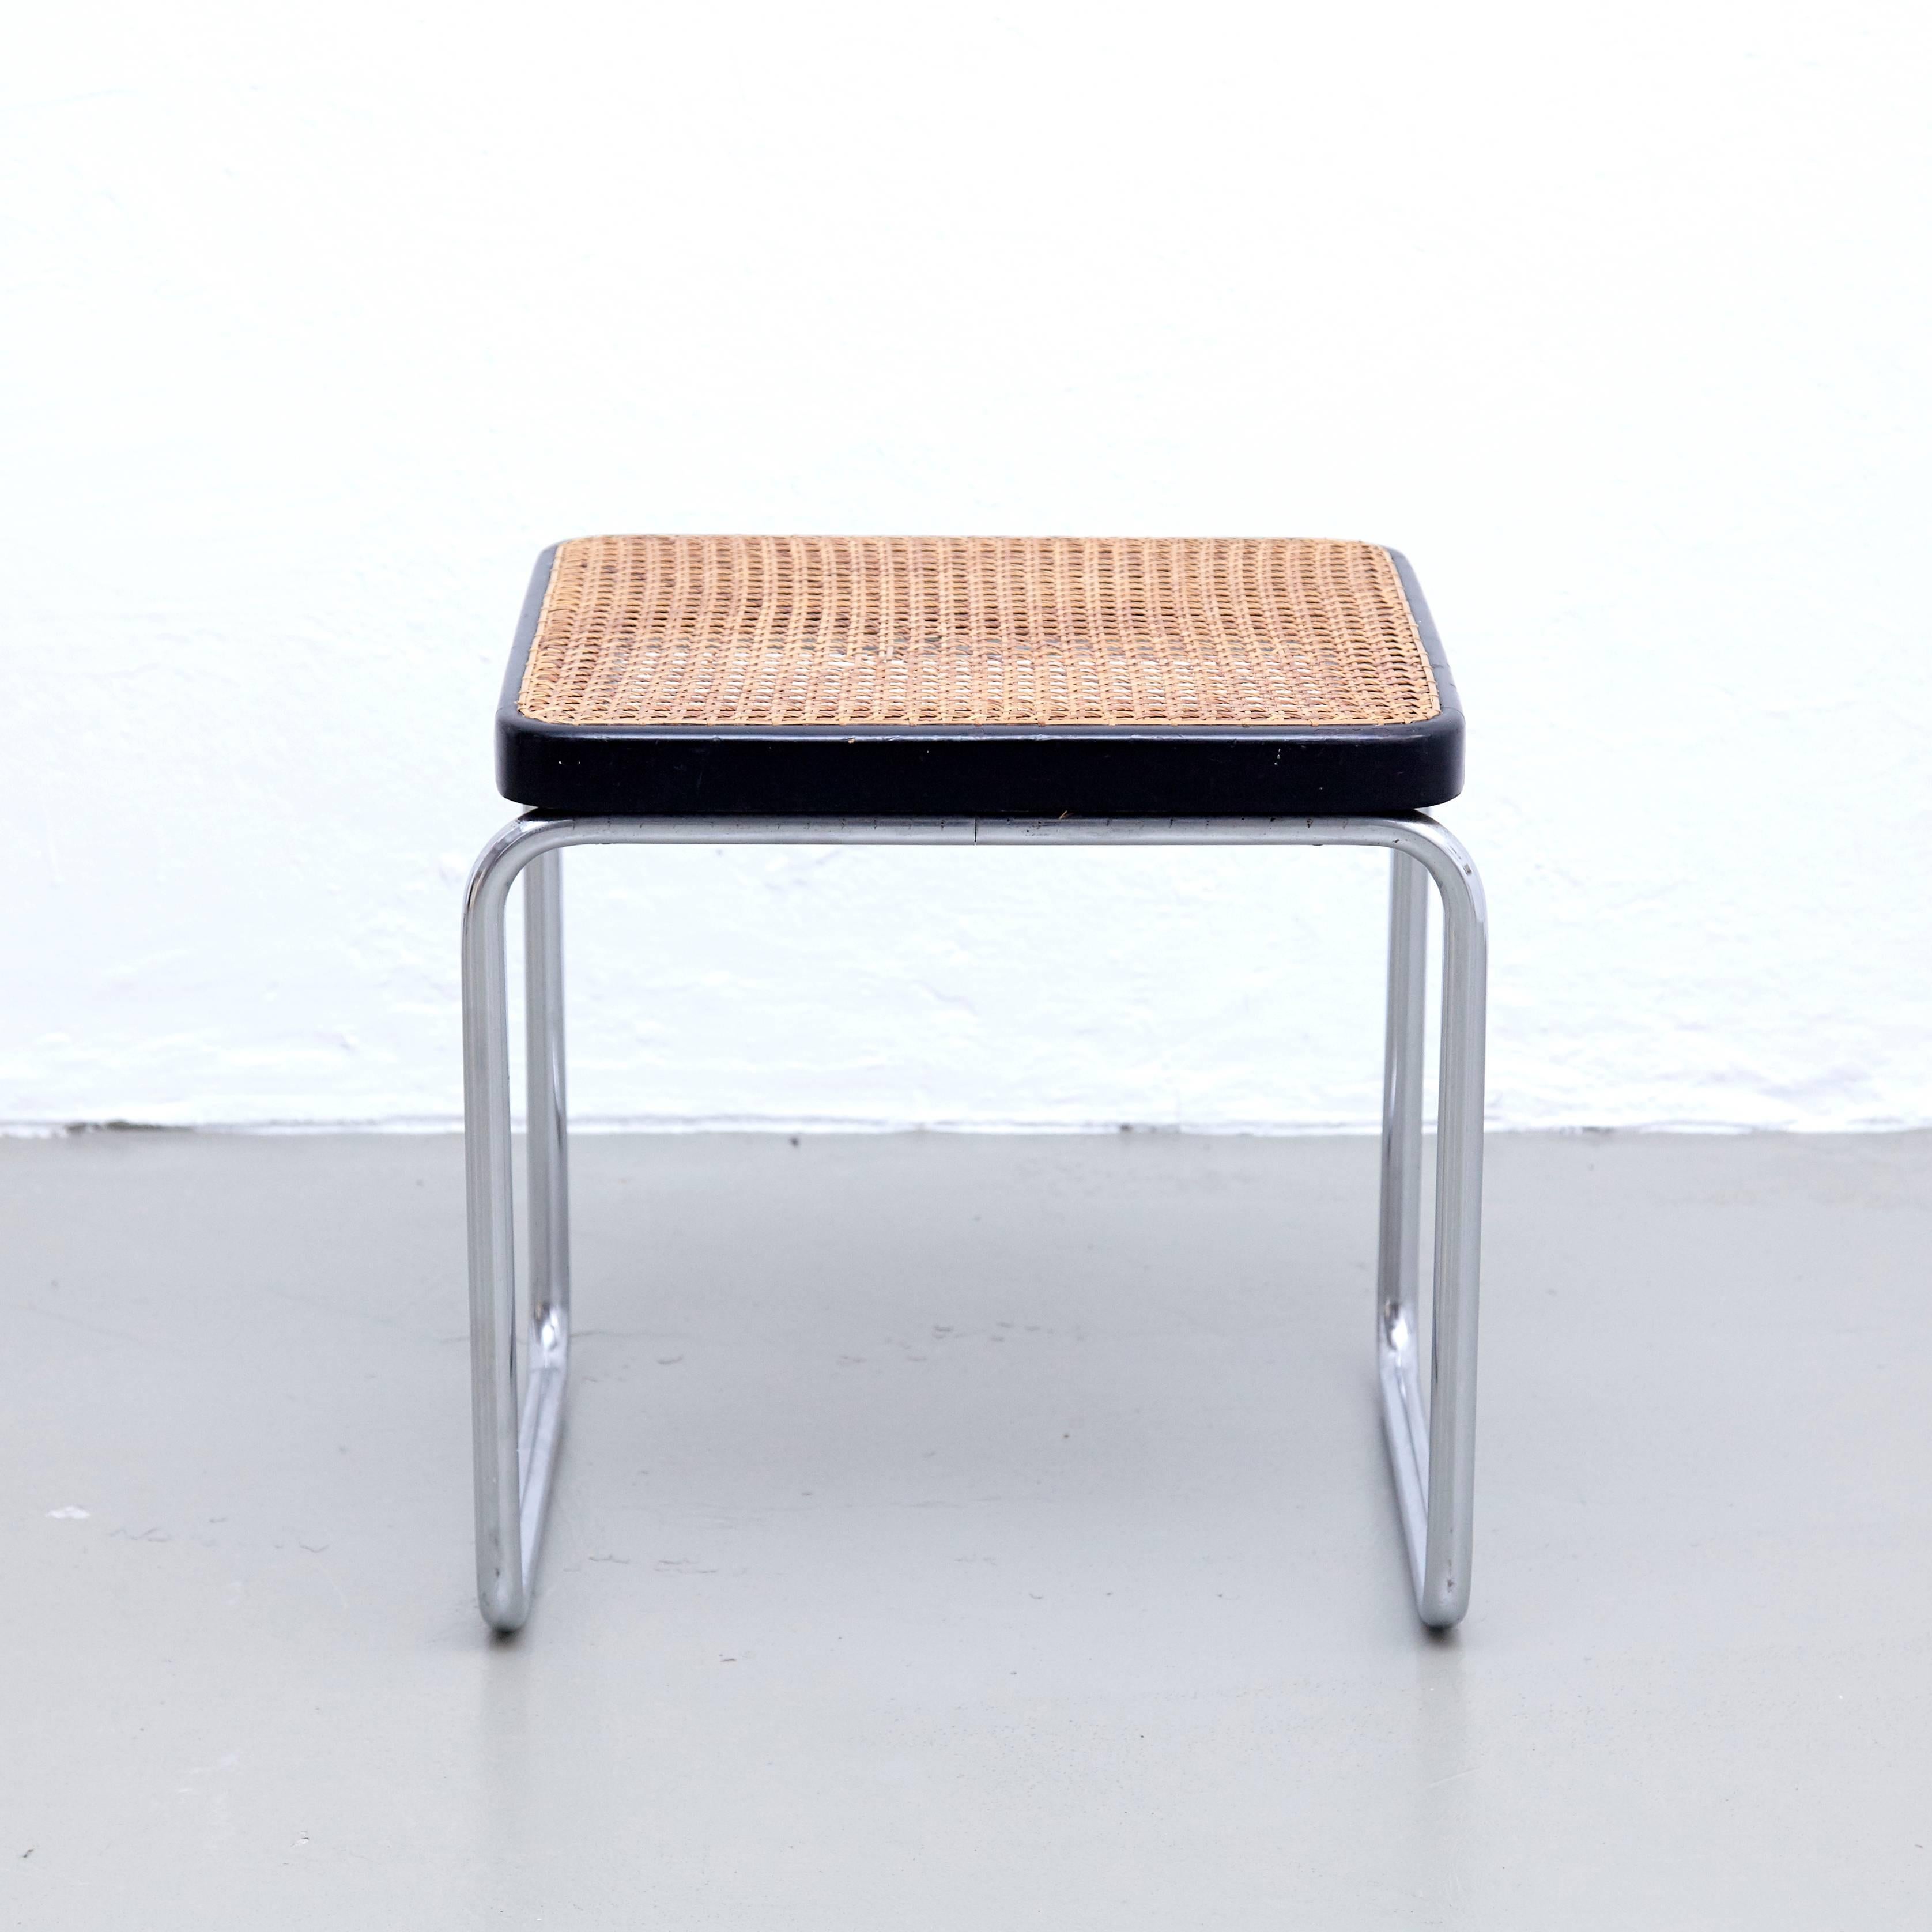 Stool designed by Marcel Breuer 
Manufactured by Thonet.

Metal pipe frame with wood structure and rattan.

In good original condition, with minor wear consistent with age and use, preserving a beautiful patina.

Marcel Breuer (1902 –1981),